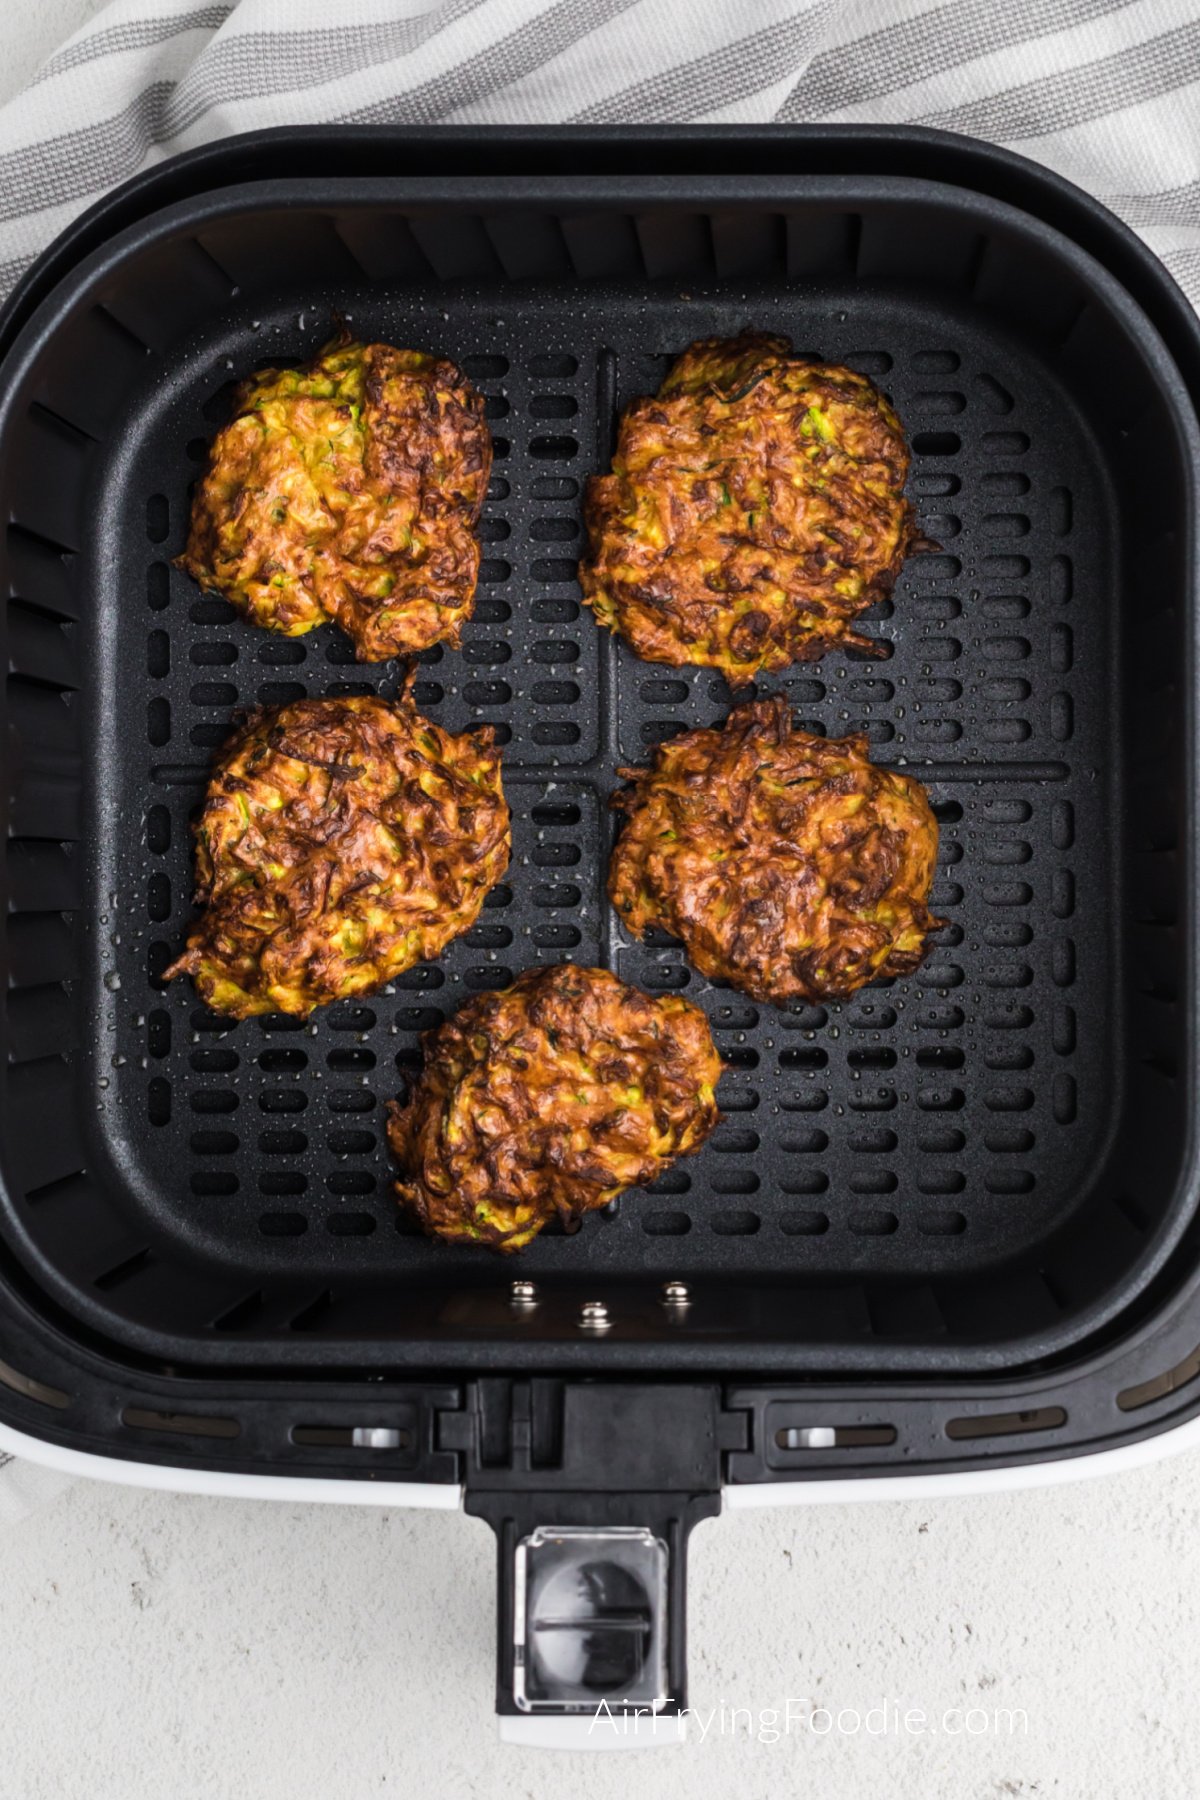 Fried zucchini fritters in the basket of the air fryer.